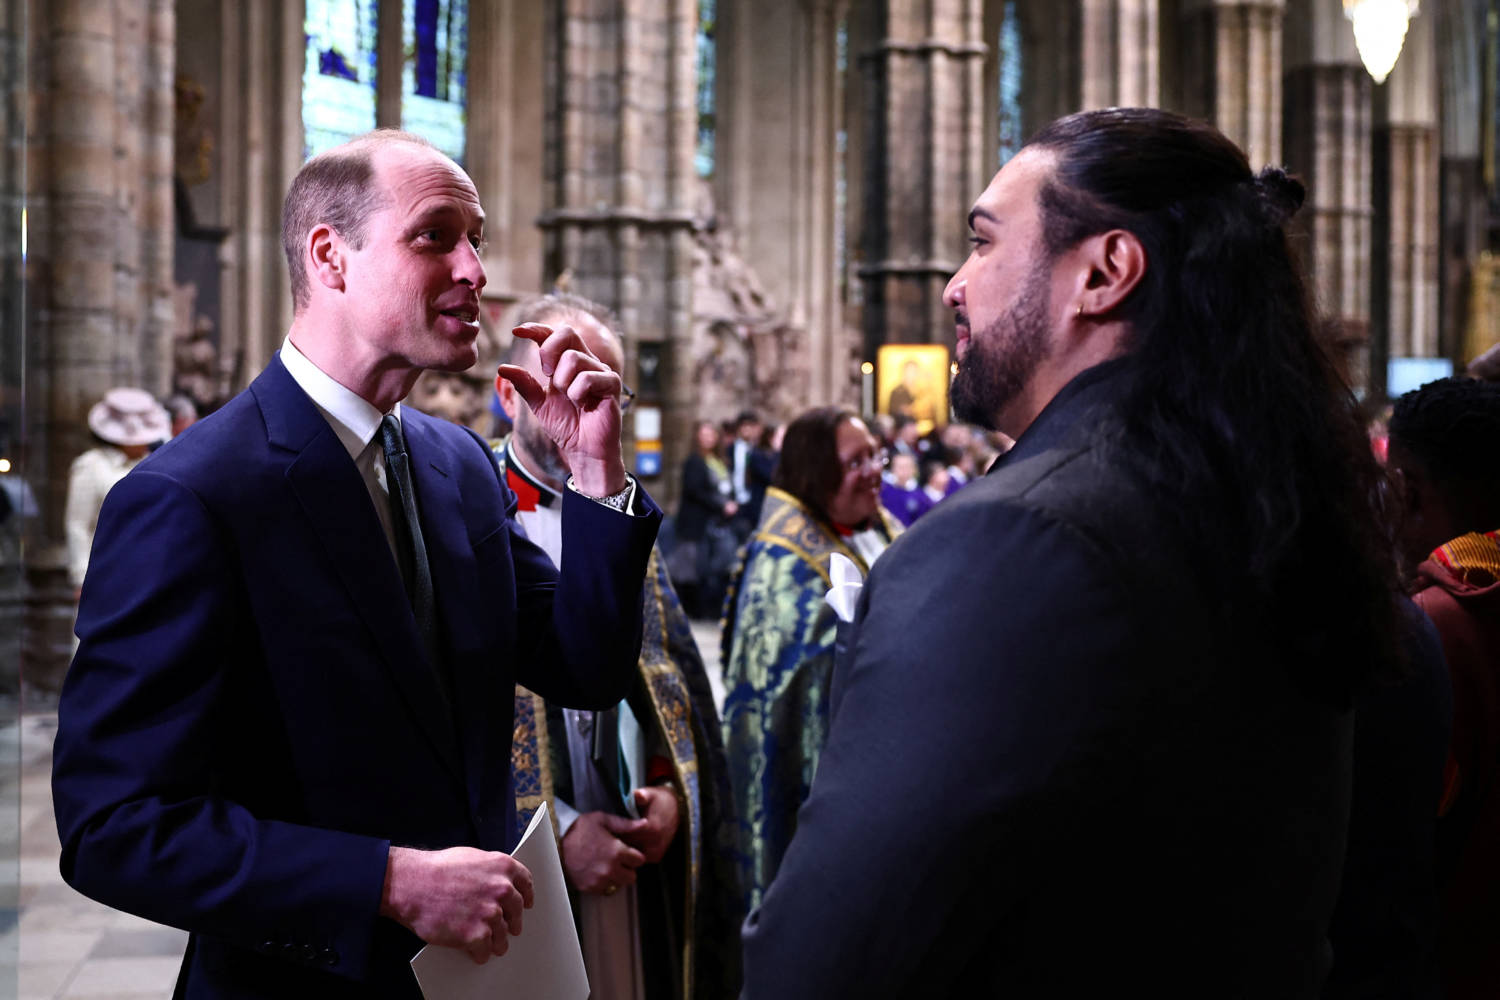 Annual Commonwealth Day Service Ceremony At Westminster Abbey In London